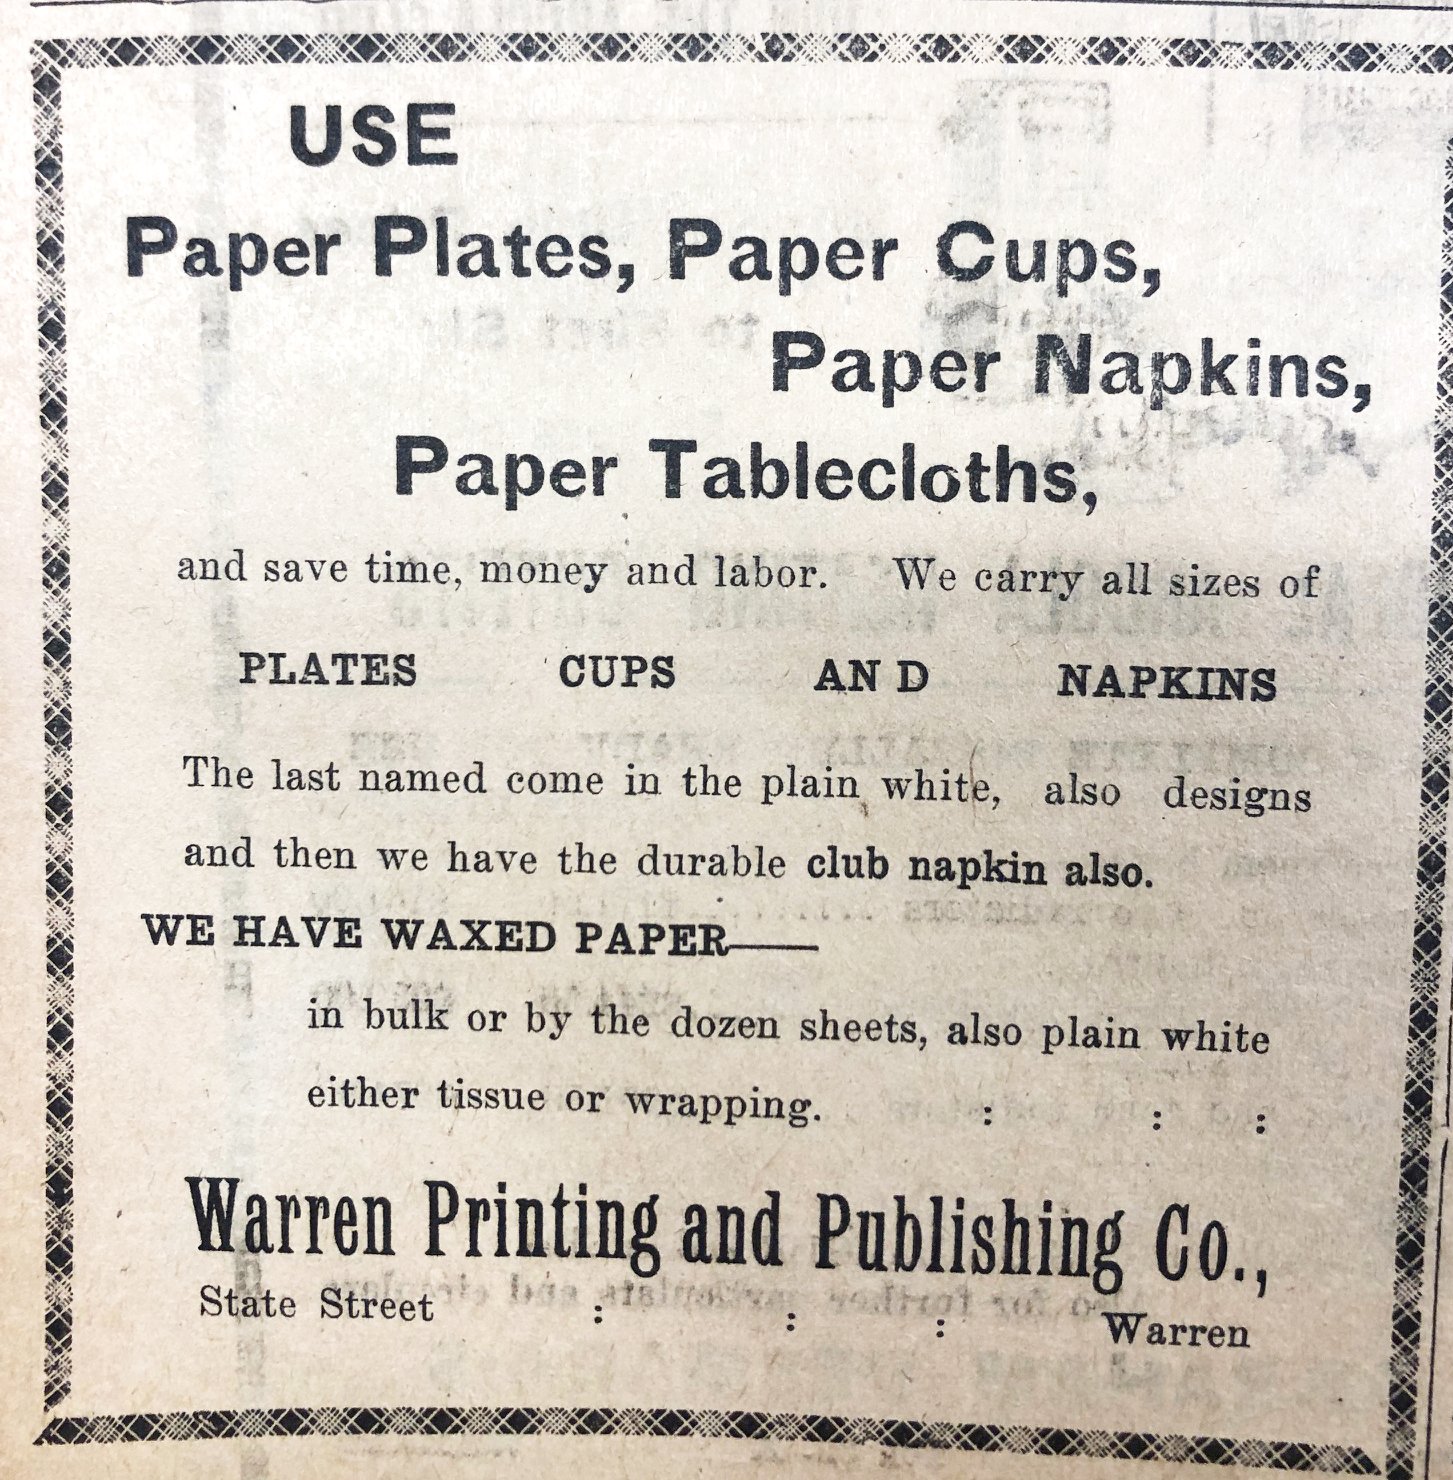 While it’s fun to see paper plates and cups worthy of such a prominent advertisement, we particularly love how excited they were about the waxed paper.